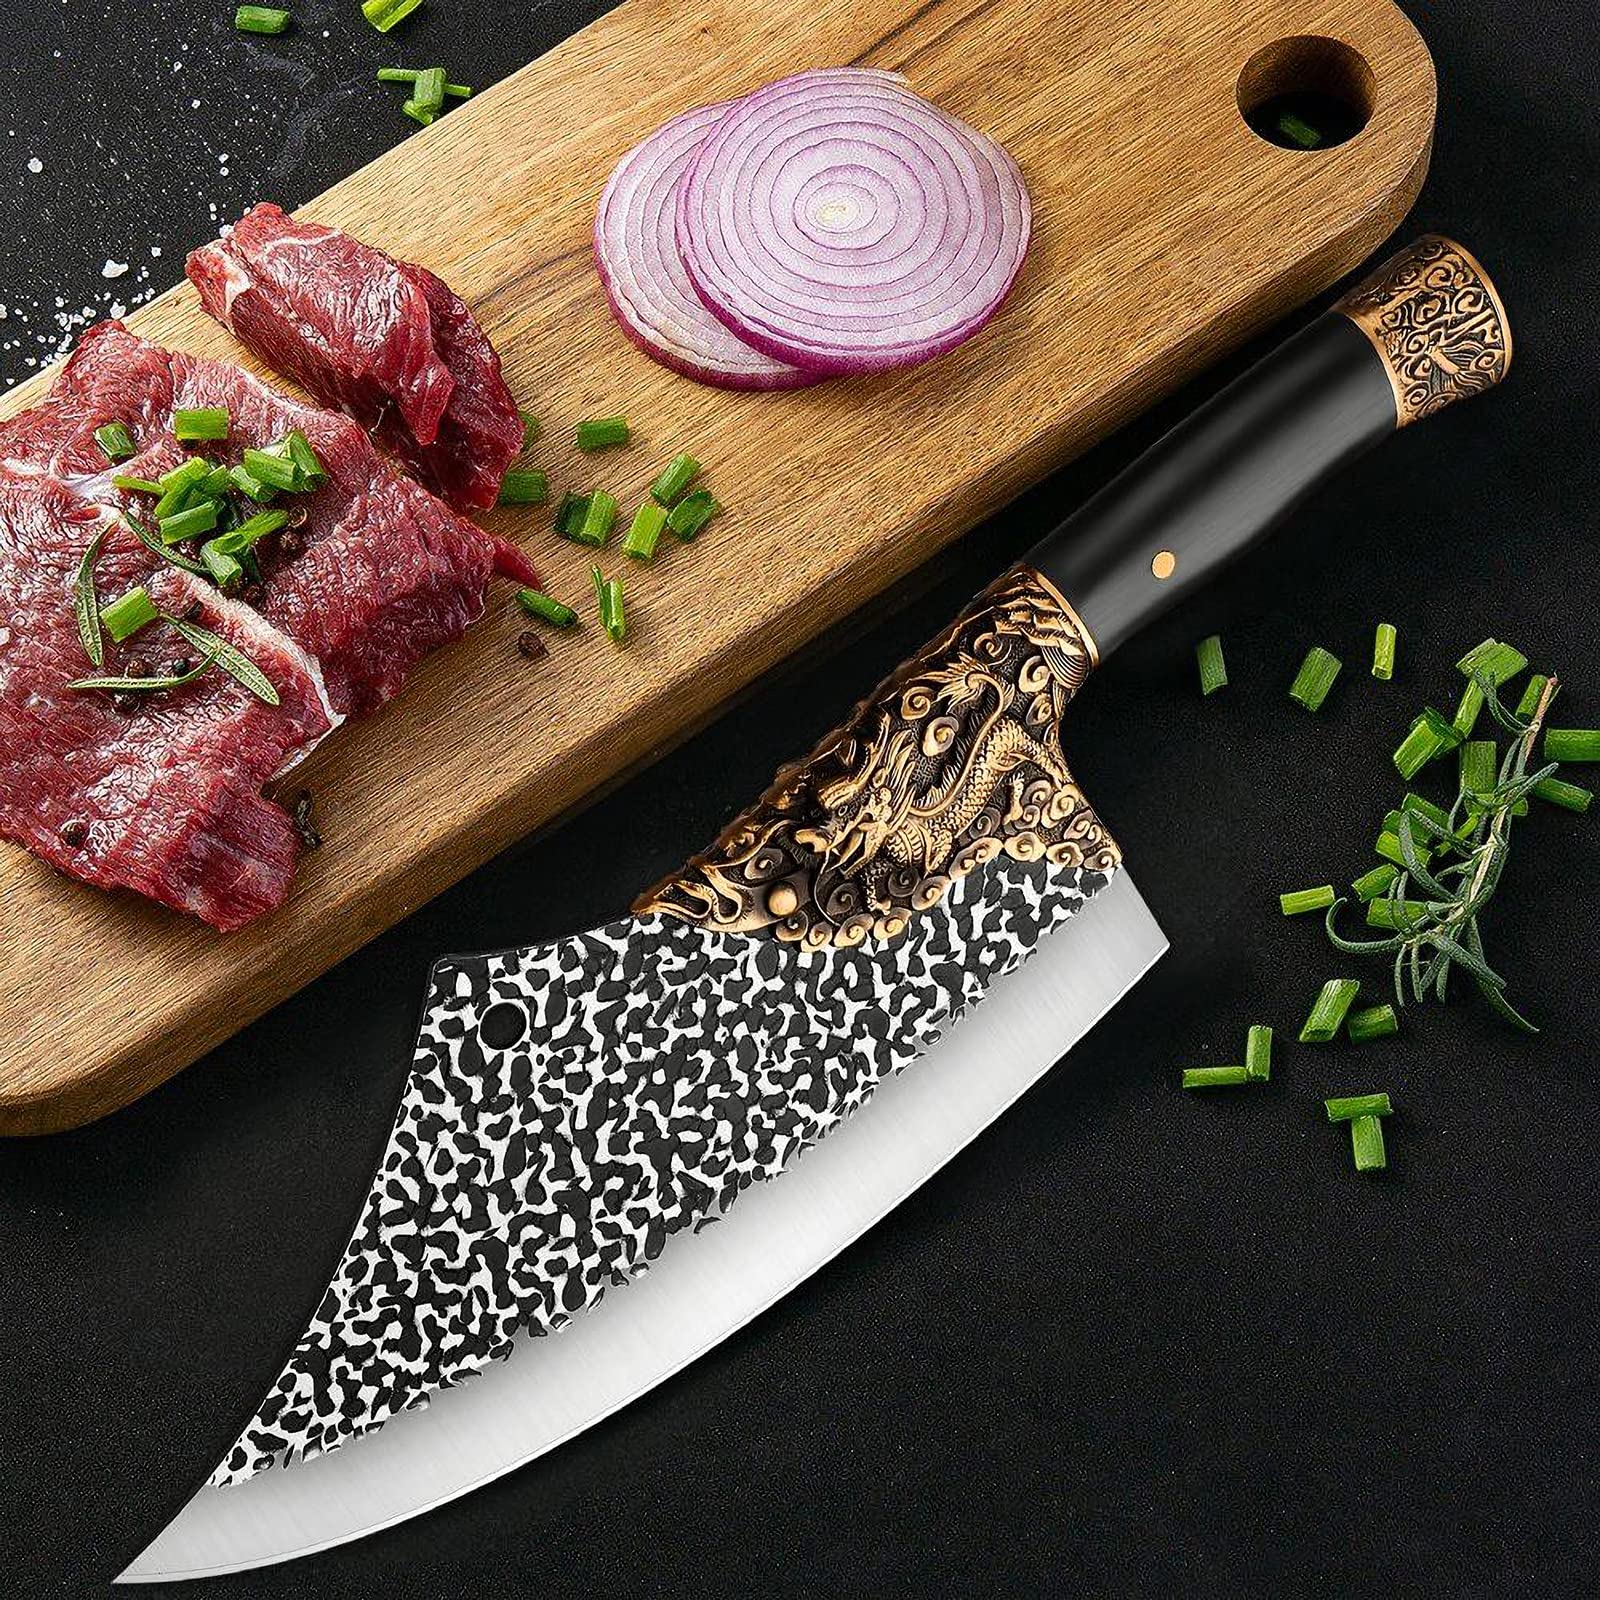 Lion Heavy-Duty Butcher Knife Meat Cleaver Hand Forged – HAND